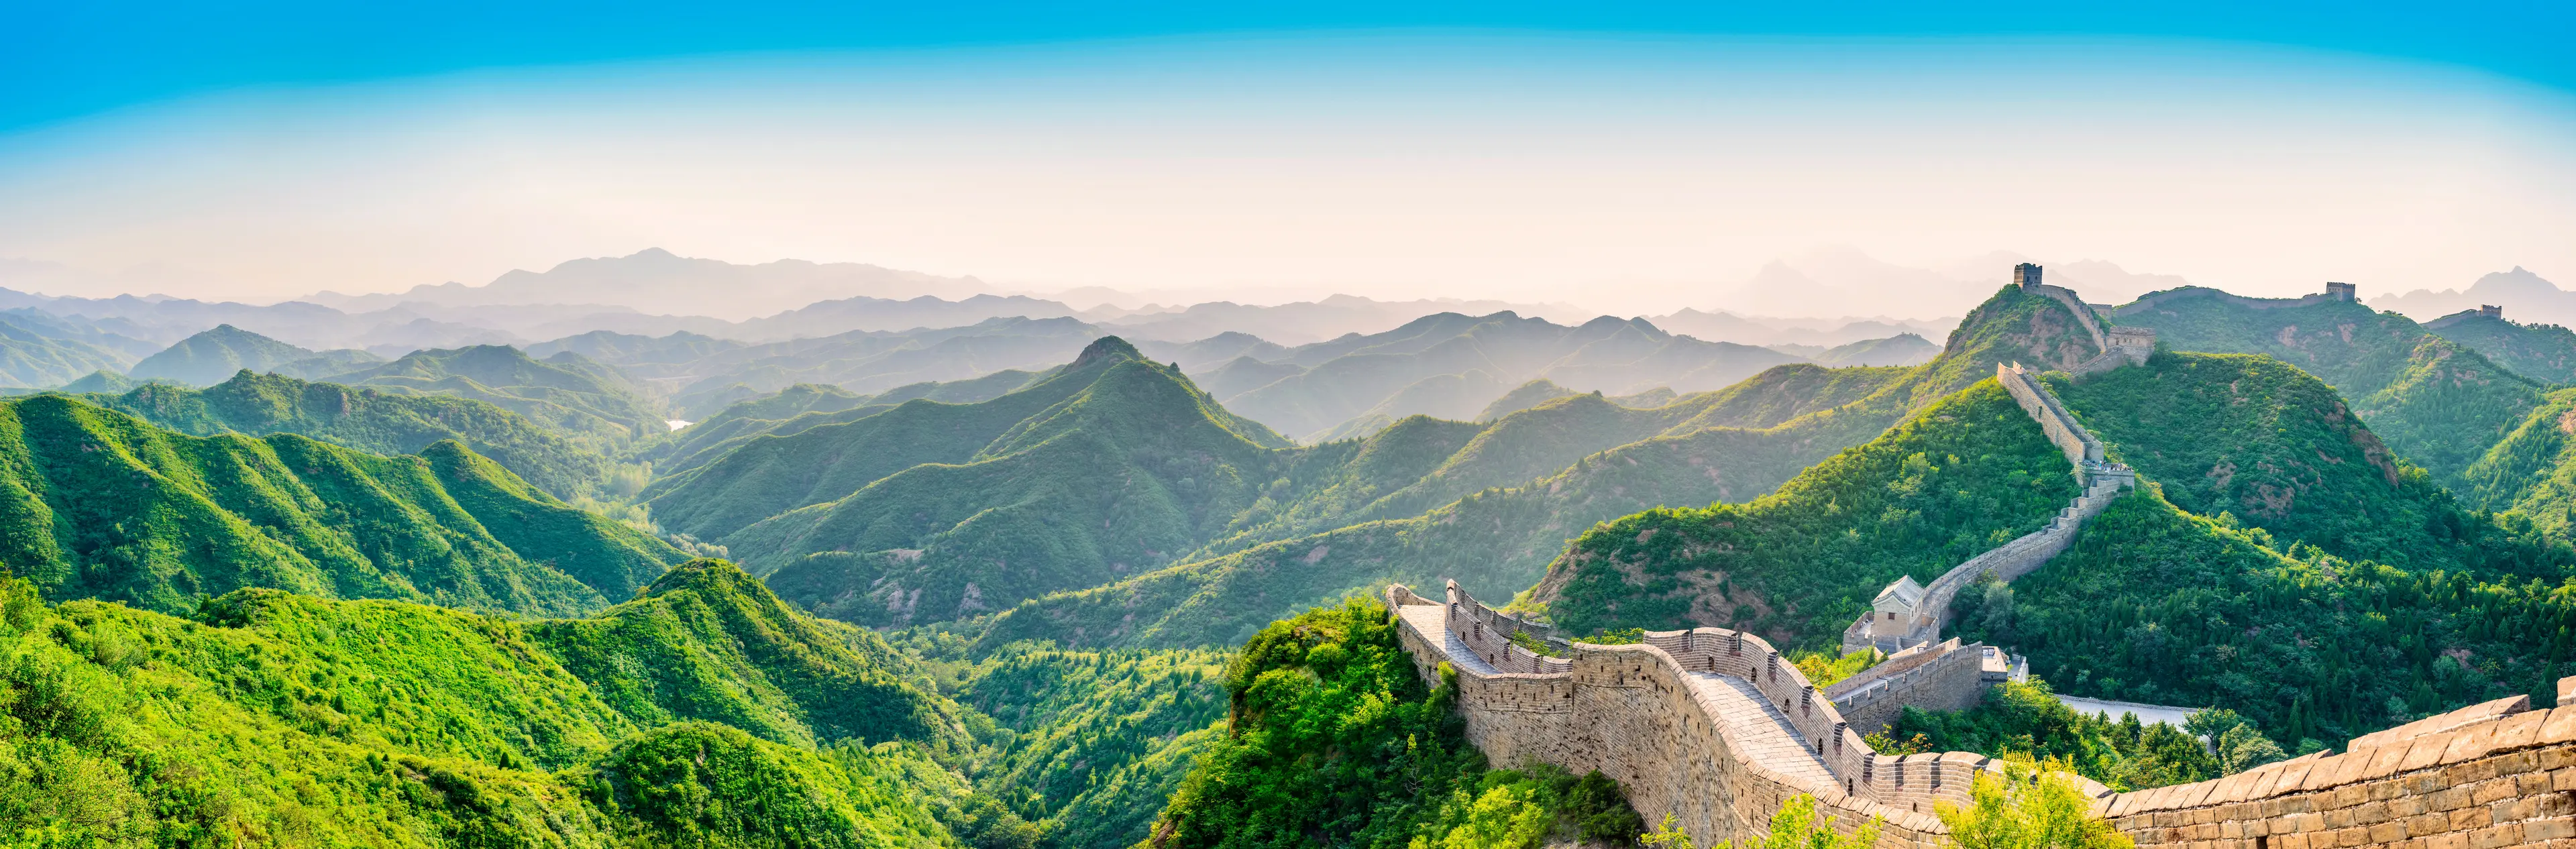 Romantic One-Day Sightseeing Tour of the Great Wall